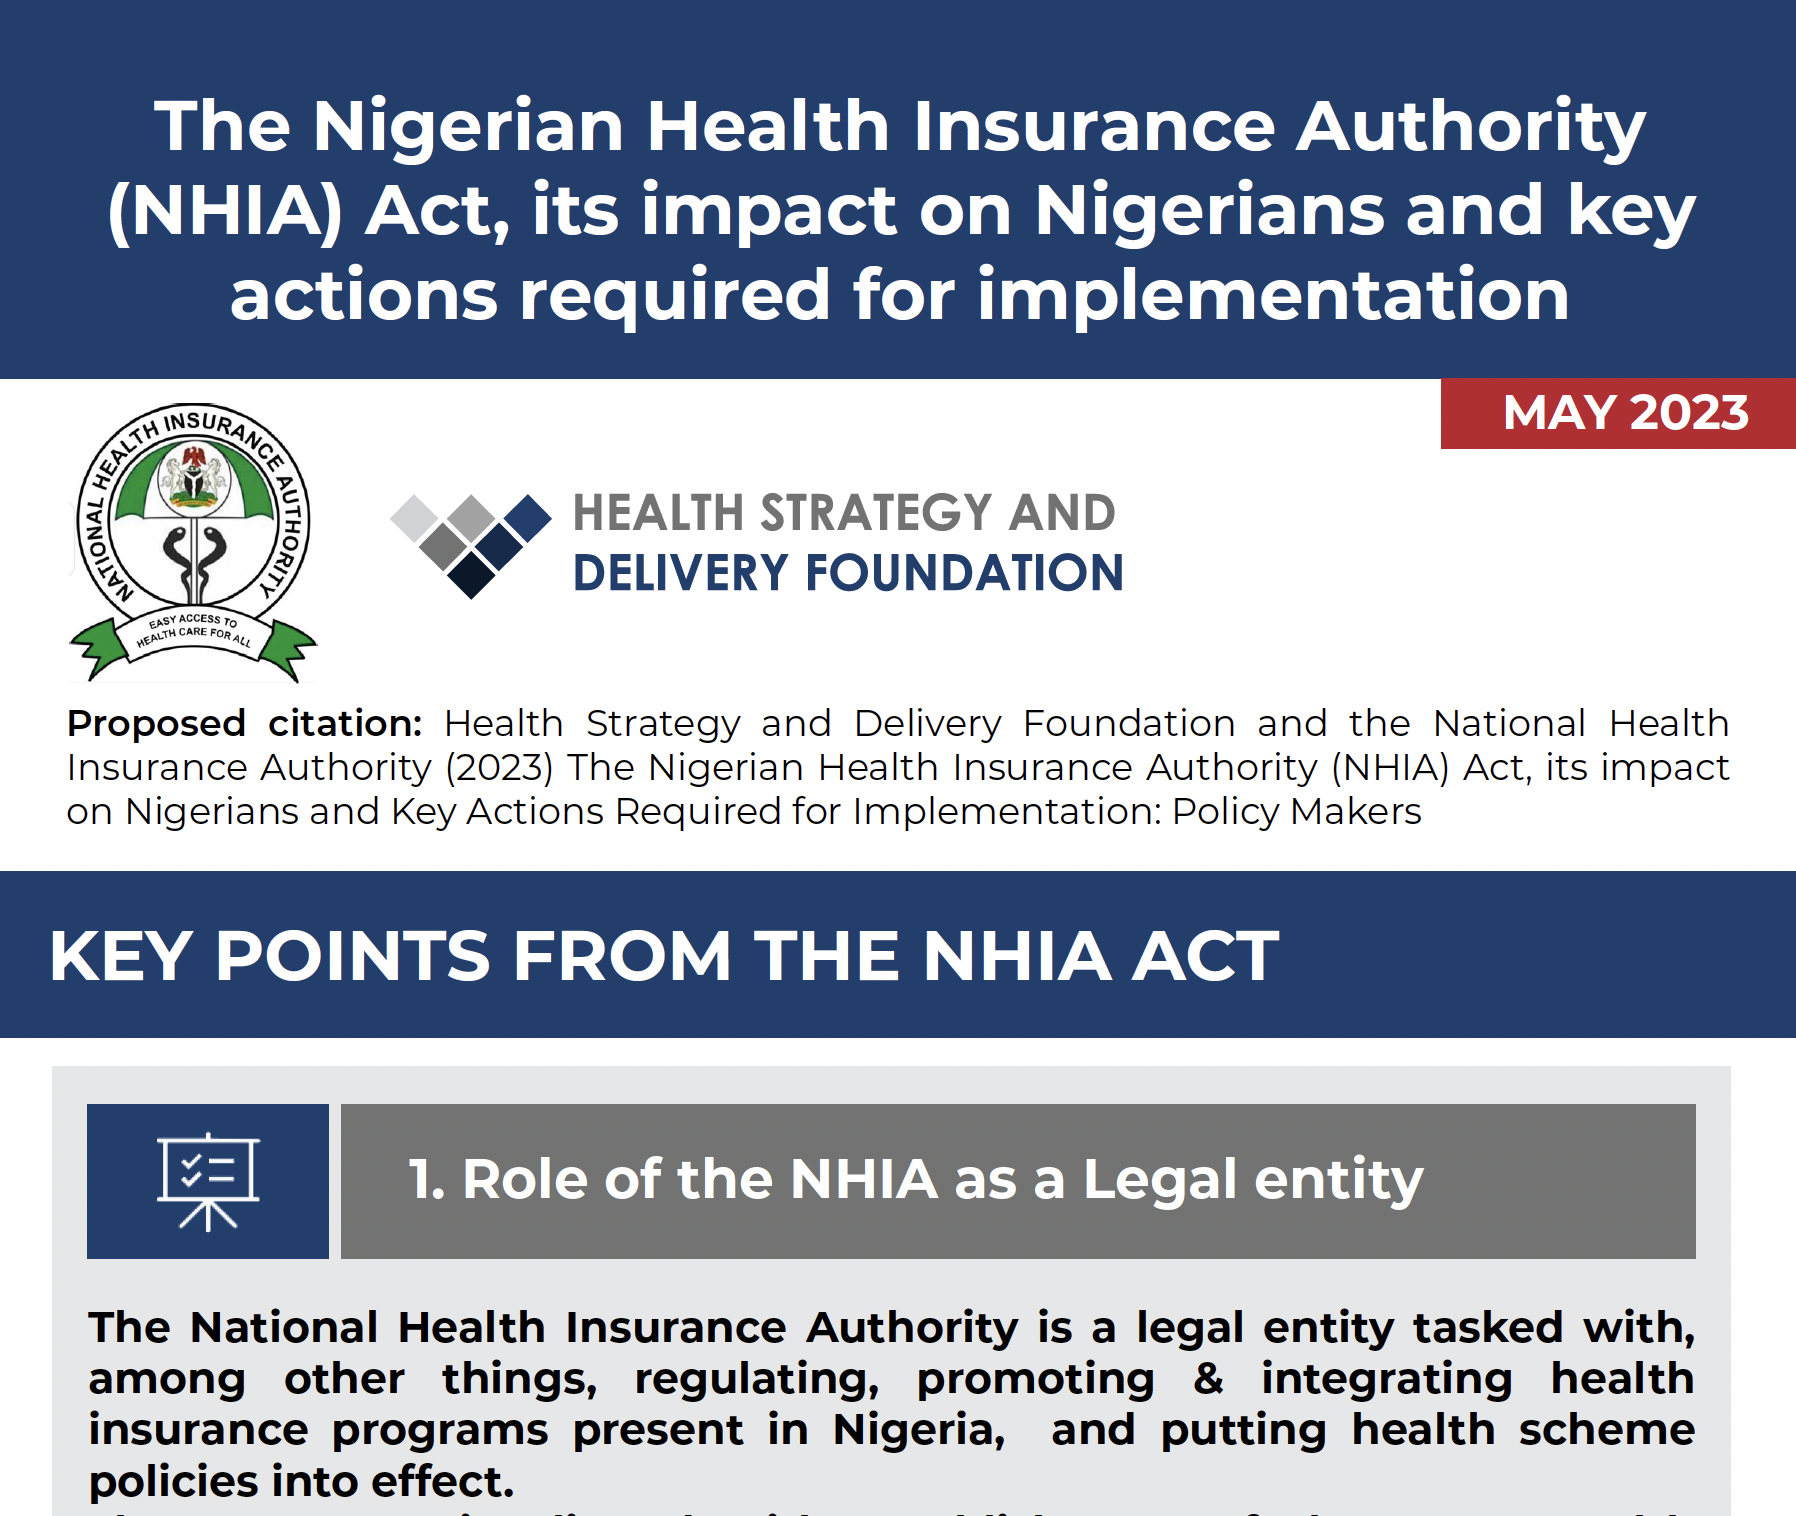 The Nigerian Health Insurance Authority Act: Required actions for Implementation for policy makers